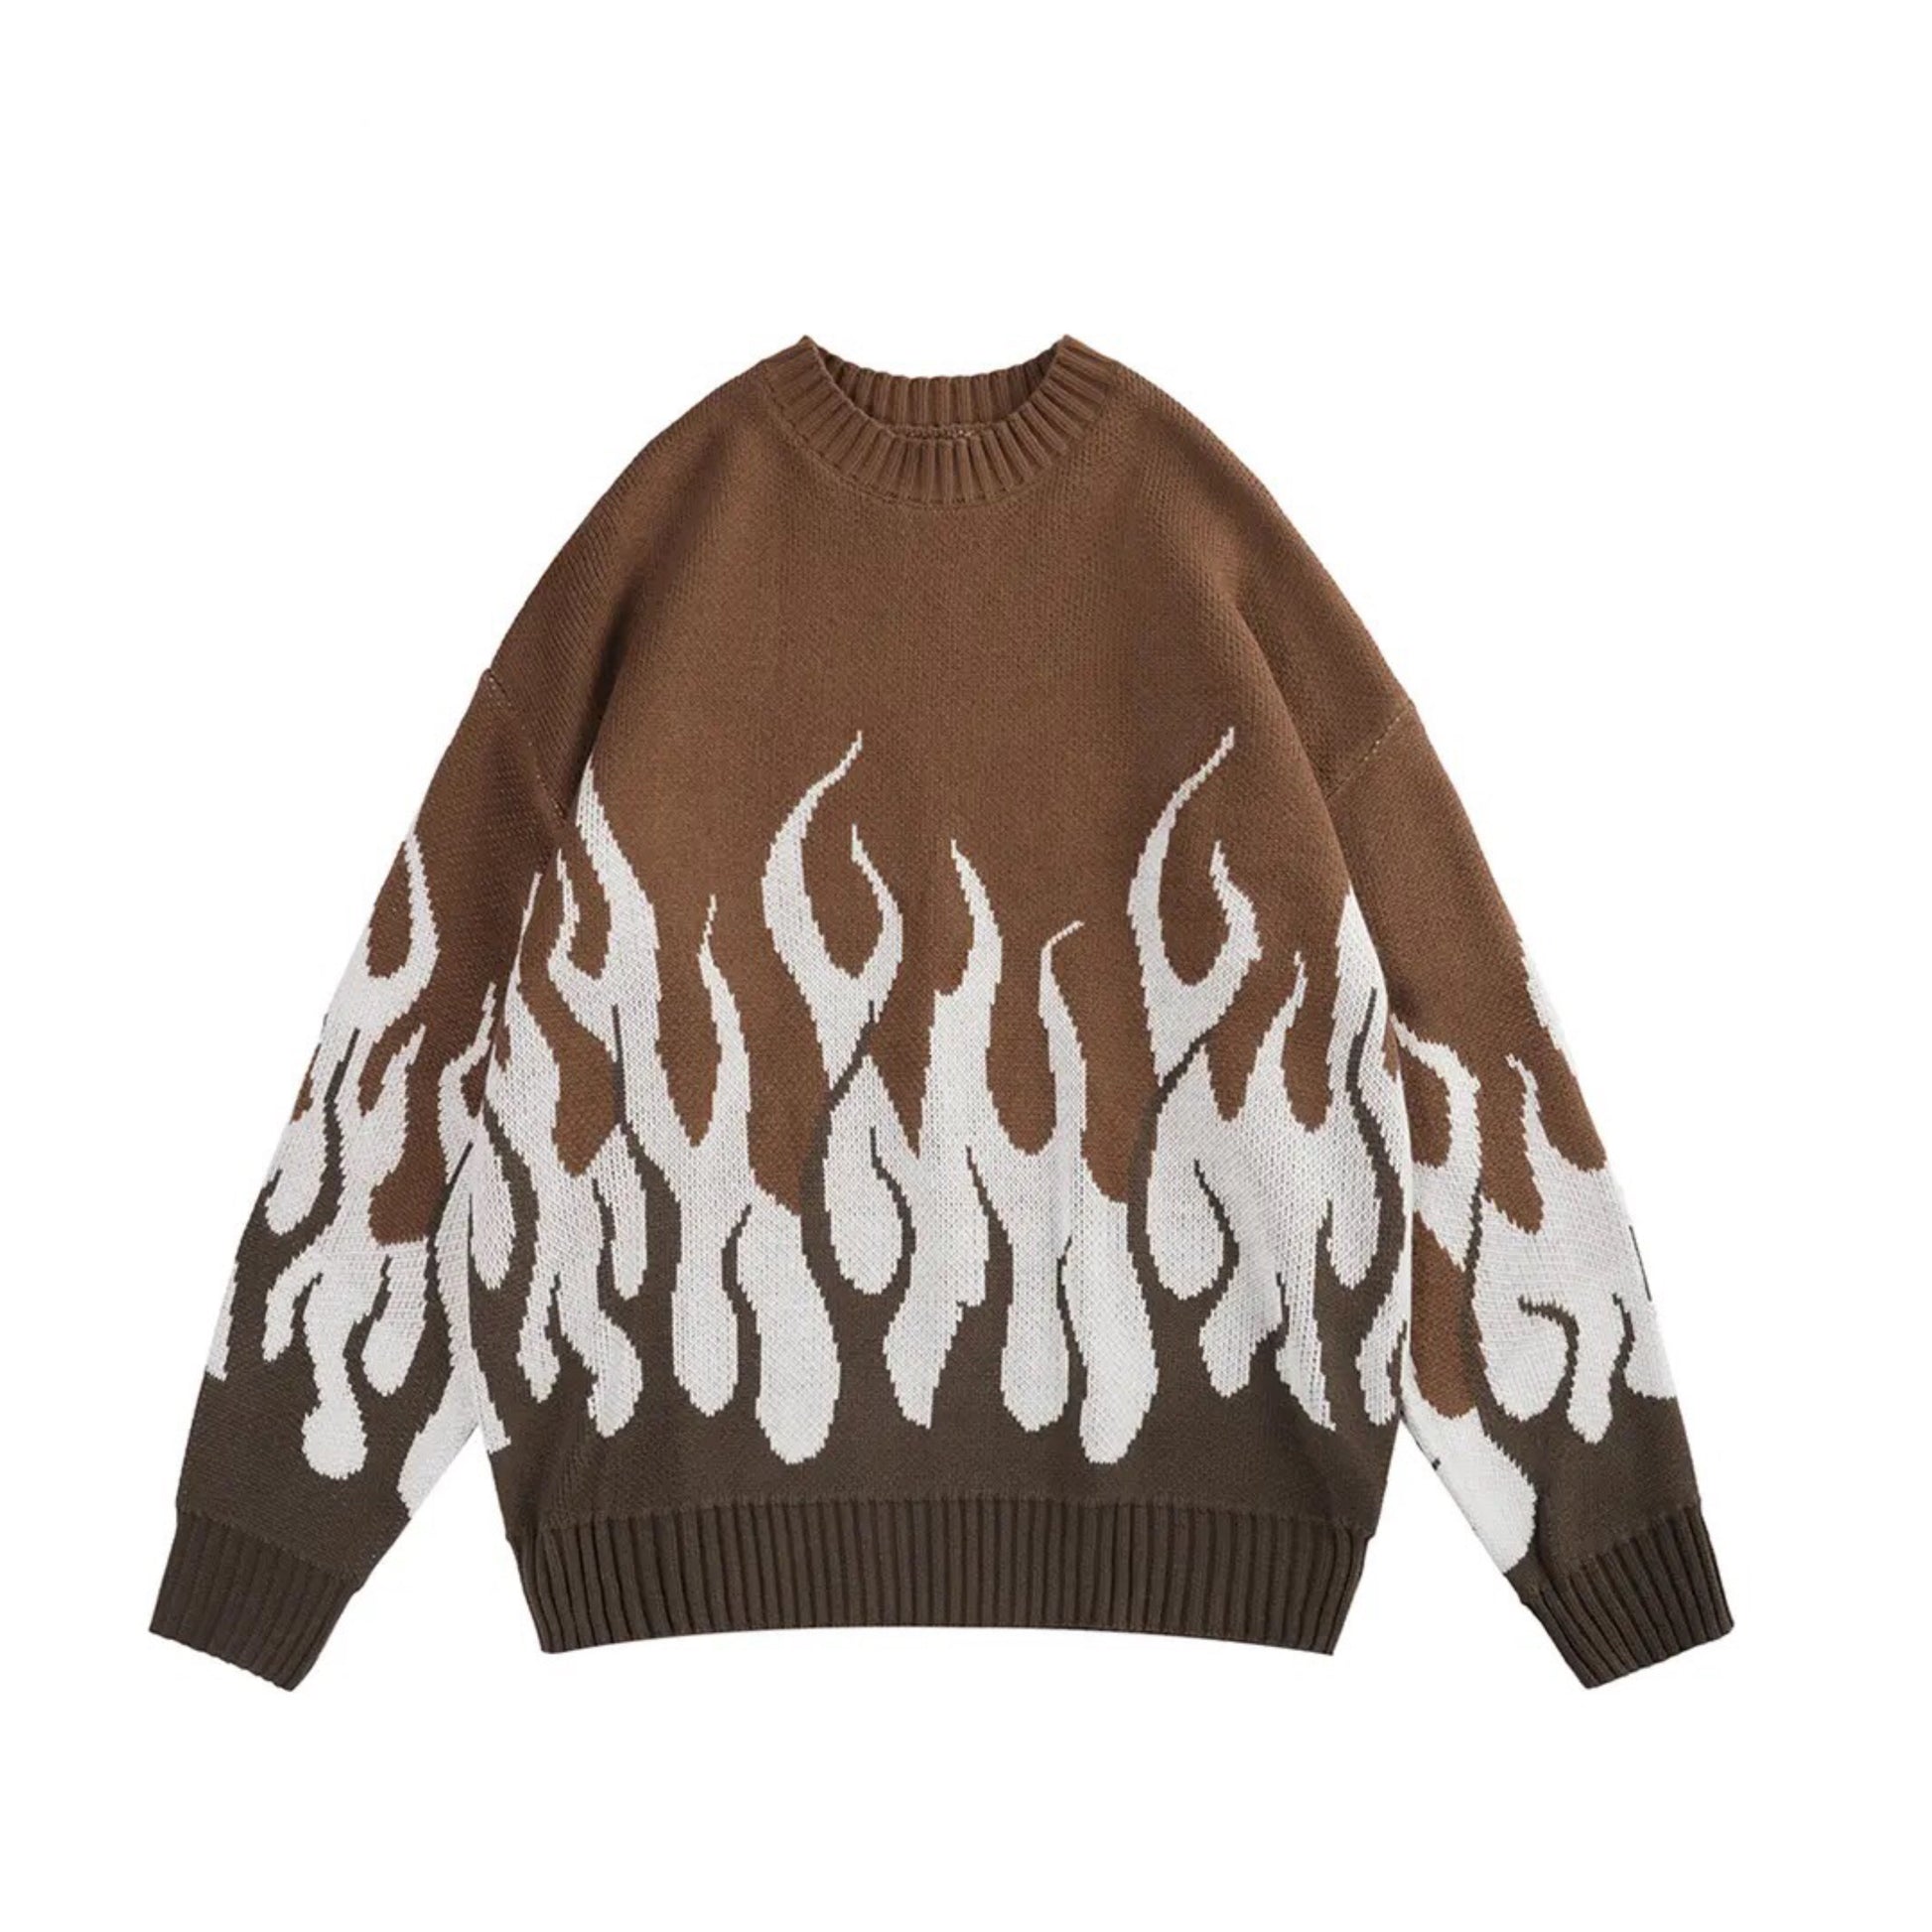 Vintage Flames Knitted Sweater